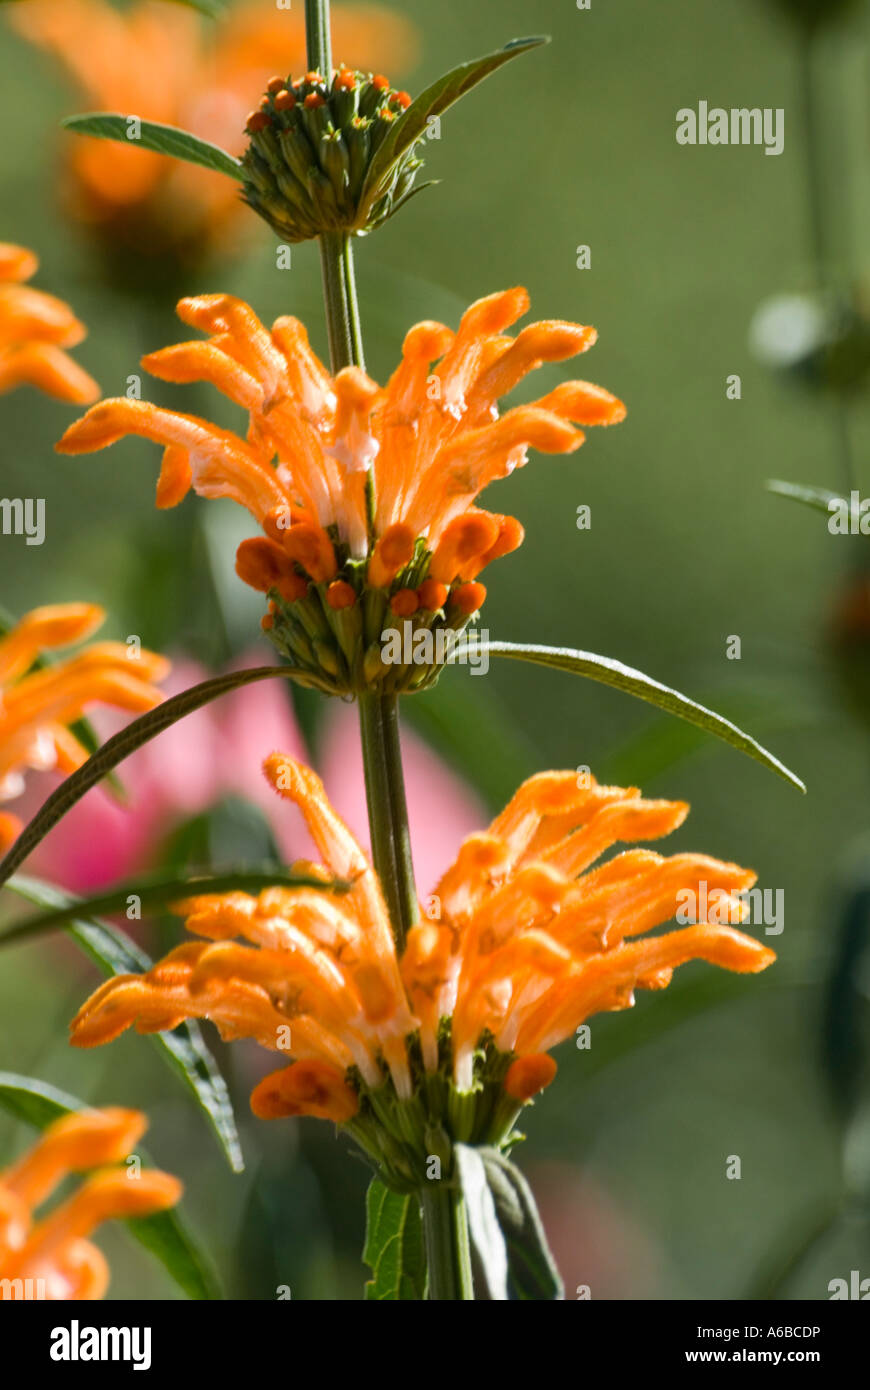 The orange flowers of the South African grassland shrub, Leonotis leonorus also known as lion's tail and wild dagga, in bloom. Known as a drug. Stock Photo